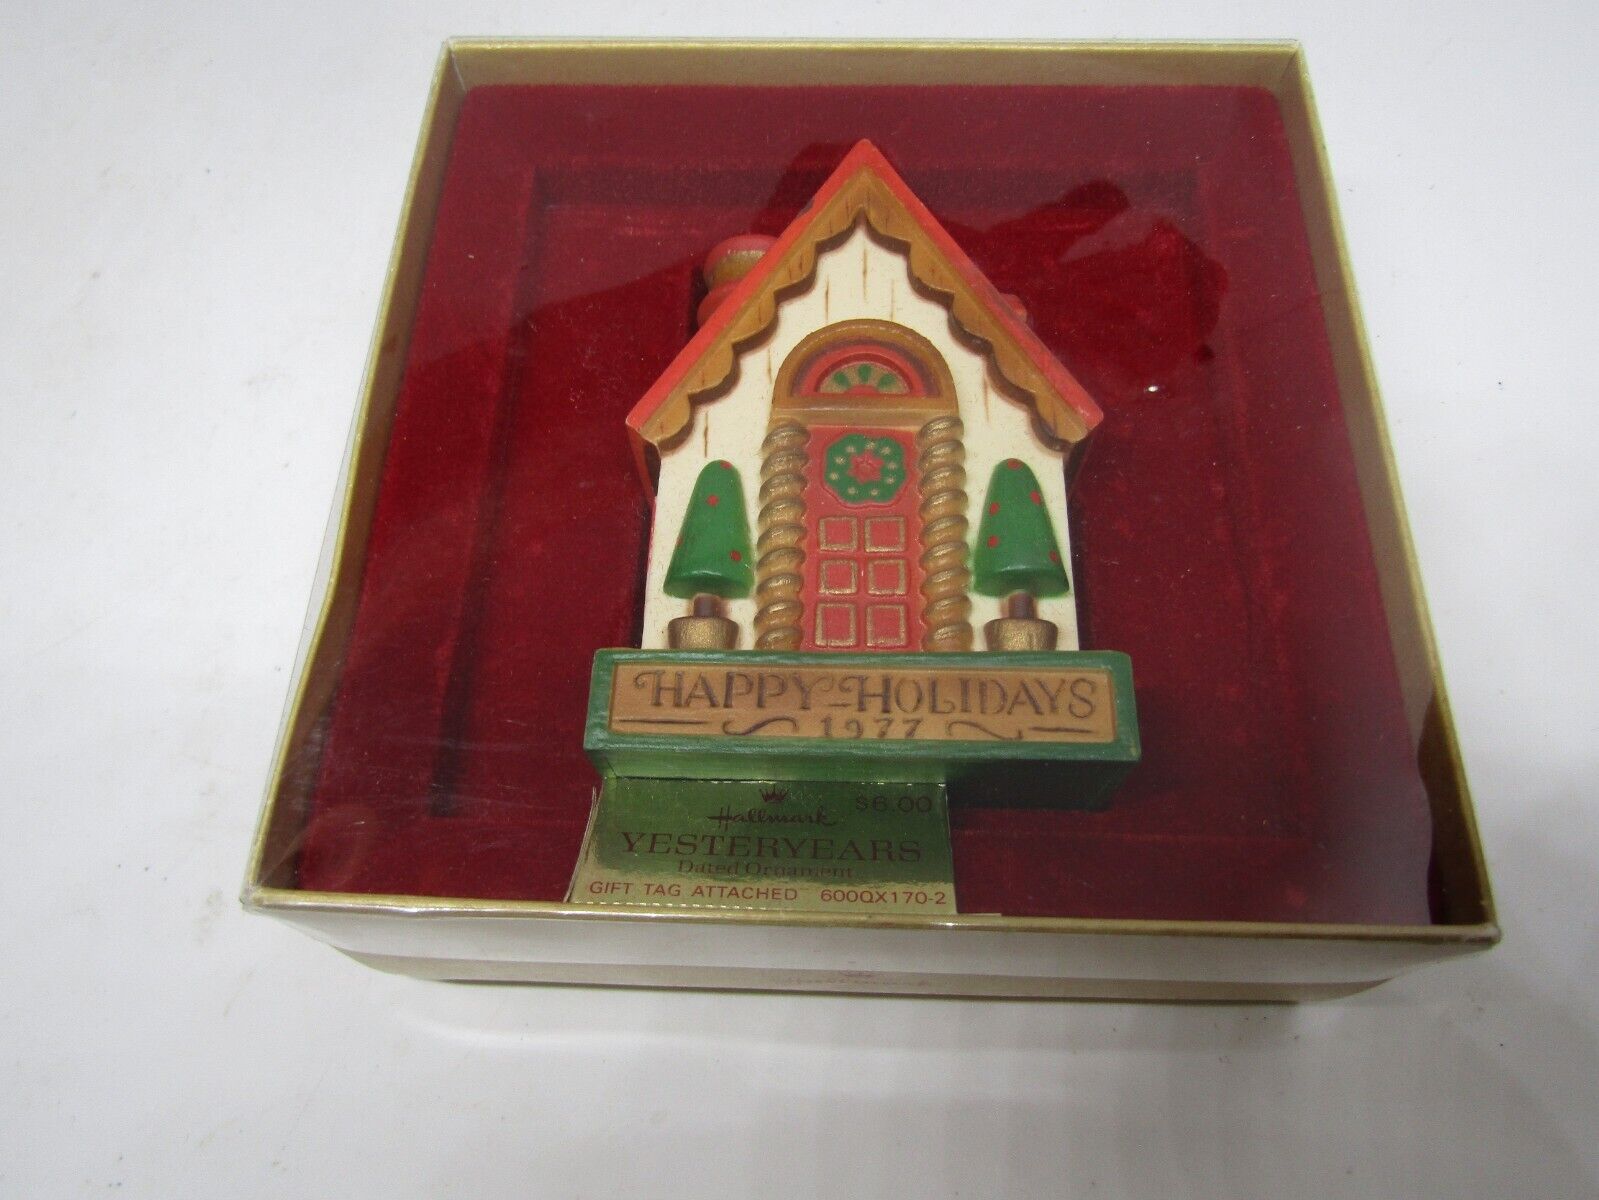 Hallmark Happy Holidays Christmas Ornament Tree-Trimmer Collection Vintage 1977